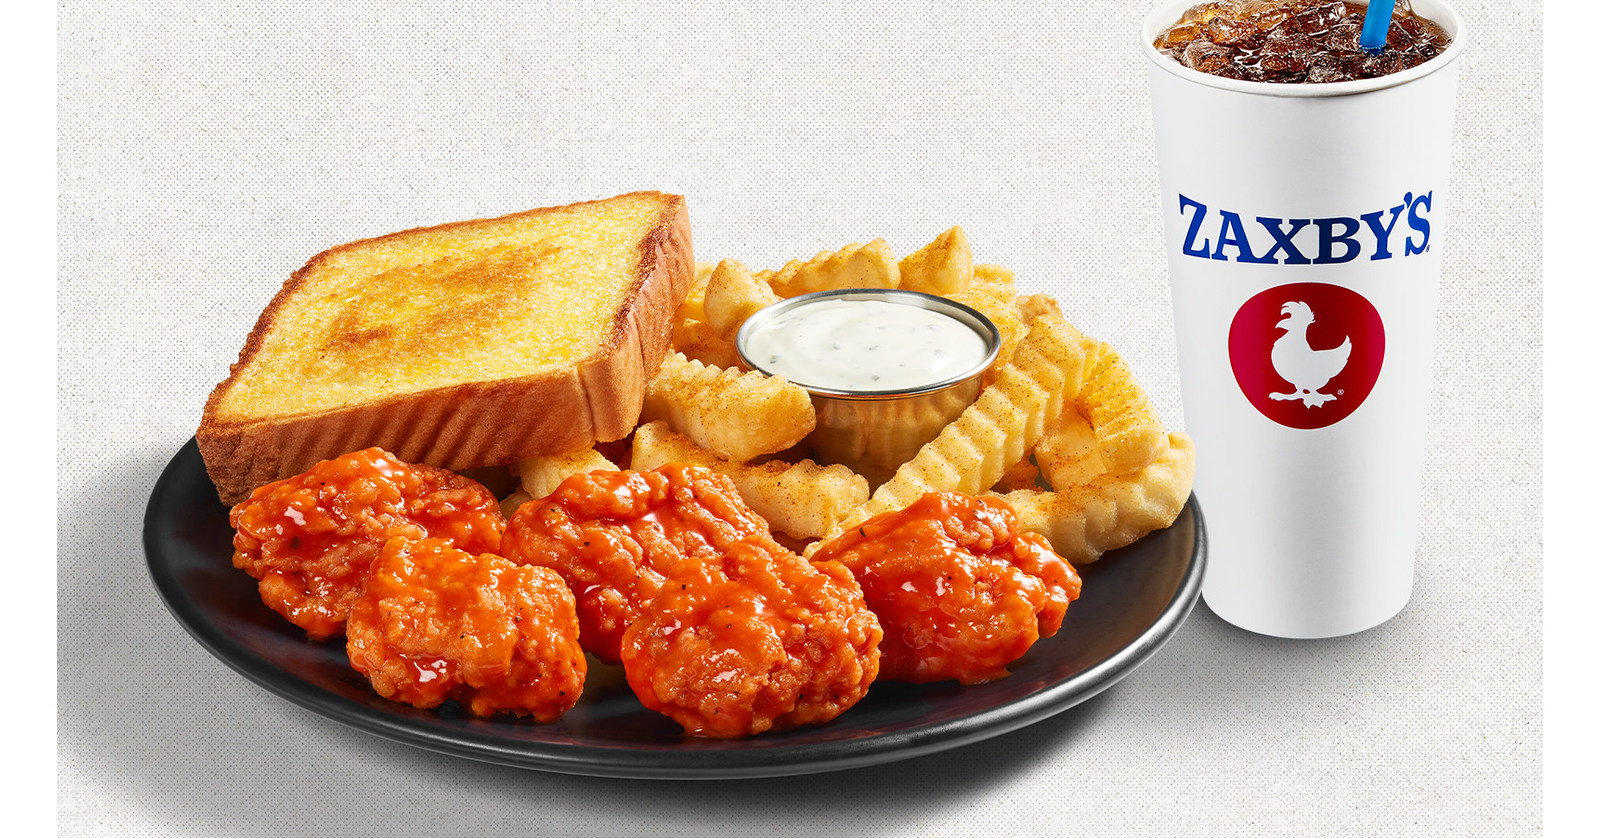 Zaxby's offers free Boneless Wings Meal for Teachers and Nurses